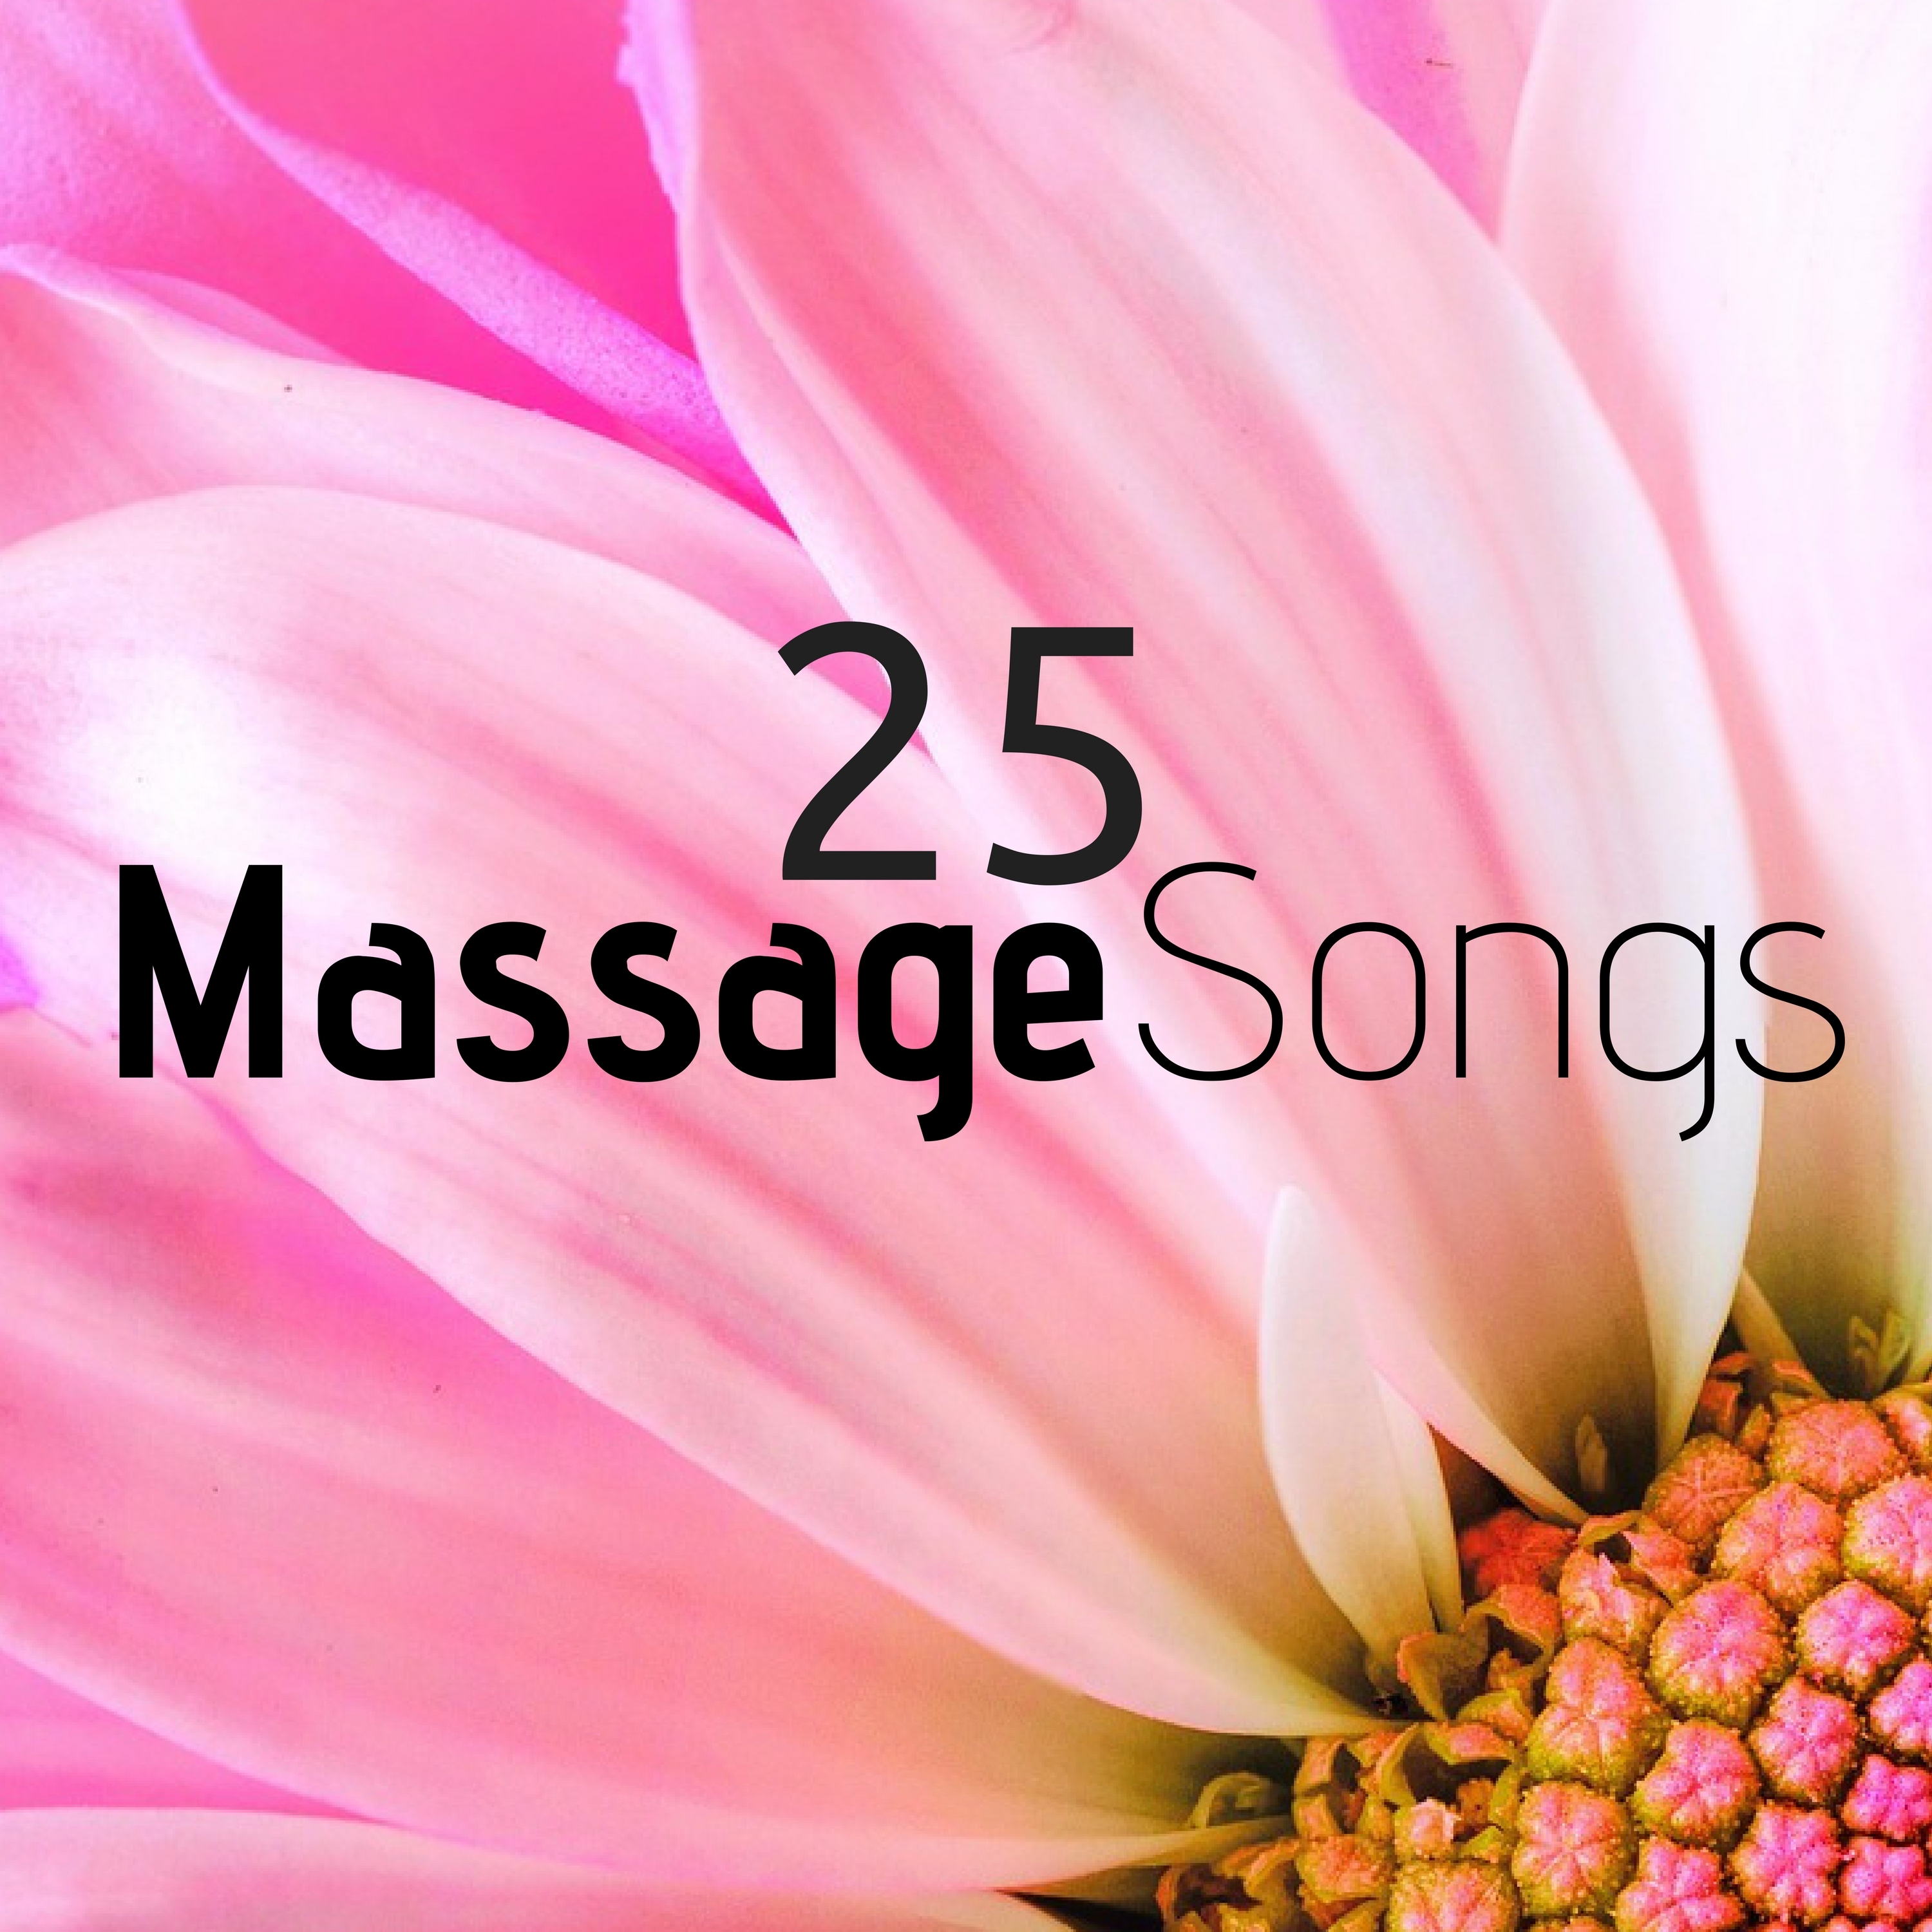 25 Massage Songs: the Best Music of the Most Beautiful Wellness Centers of the World